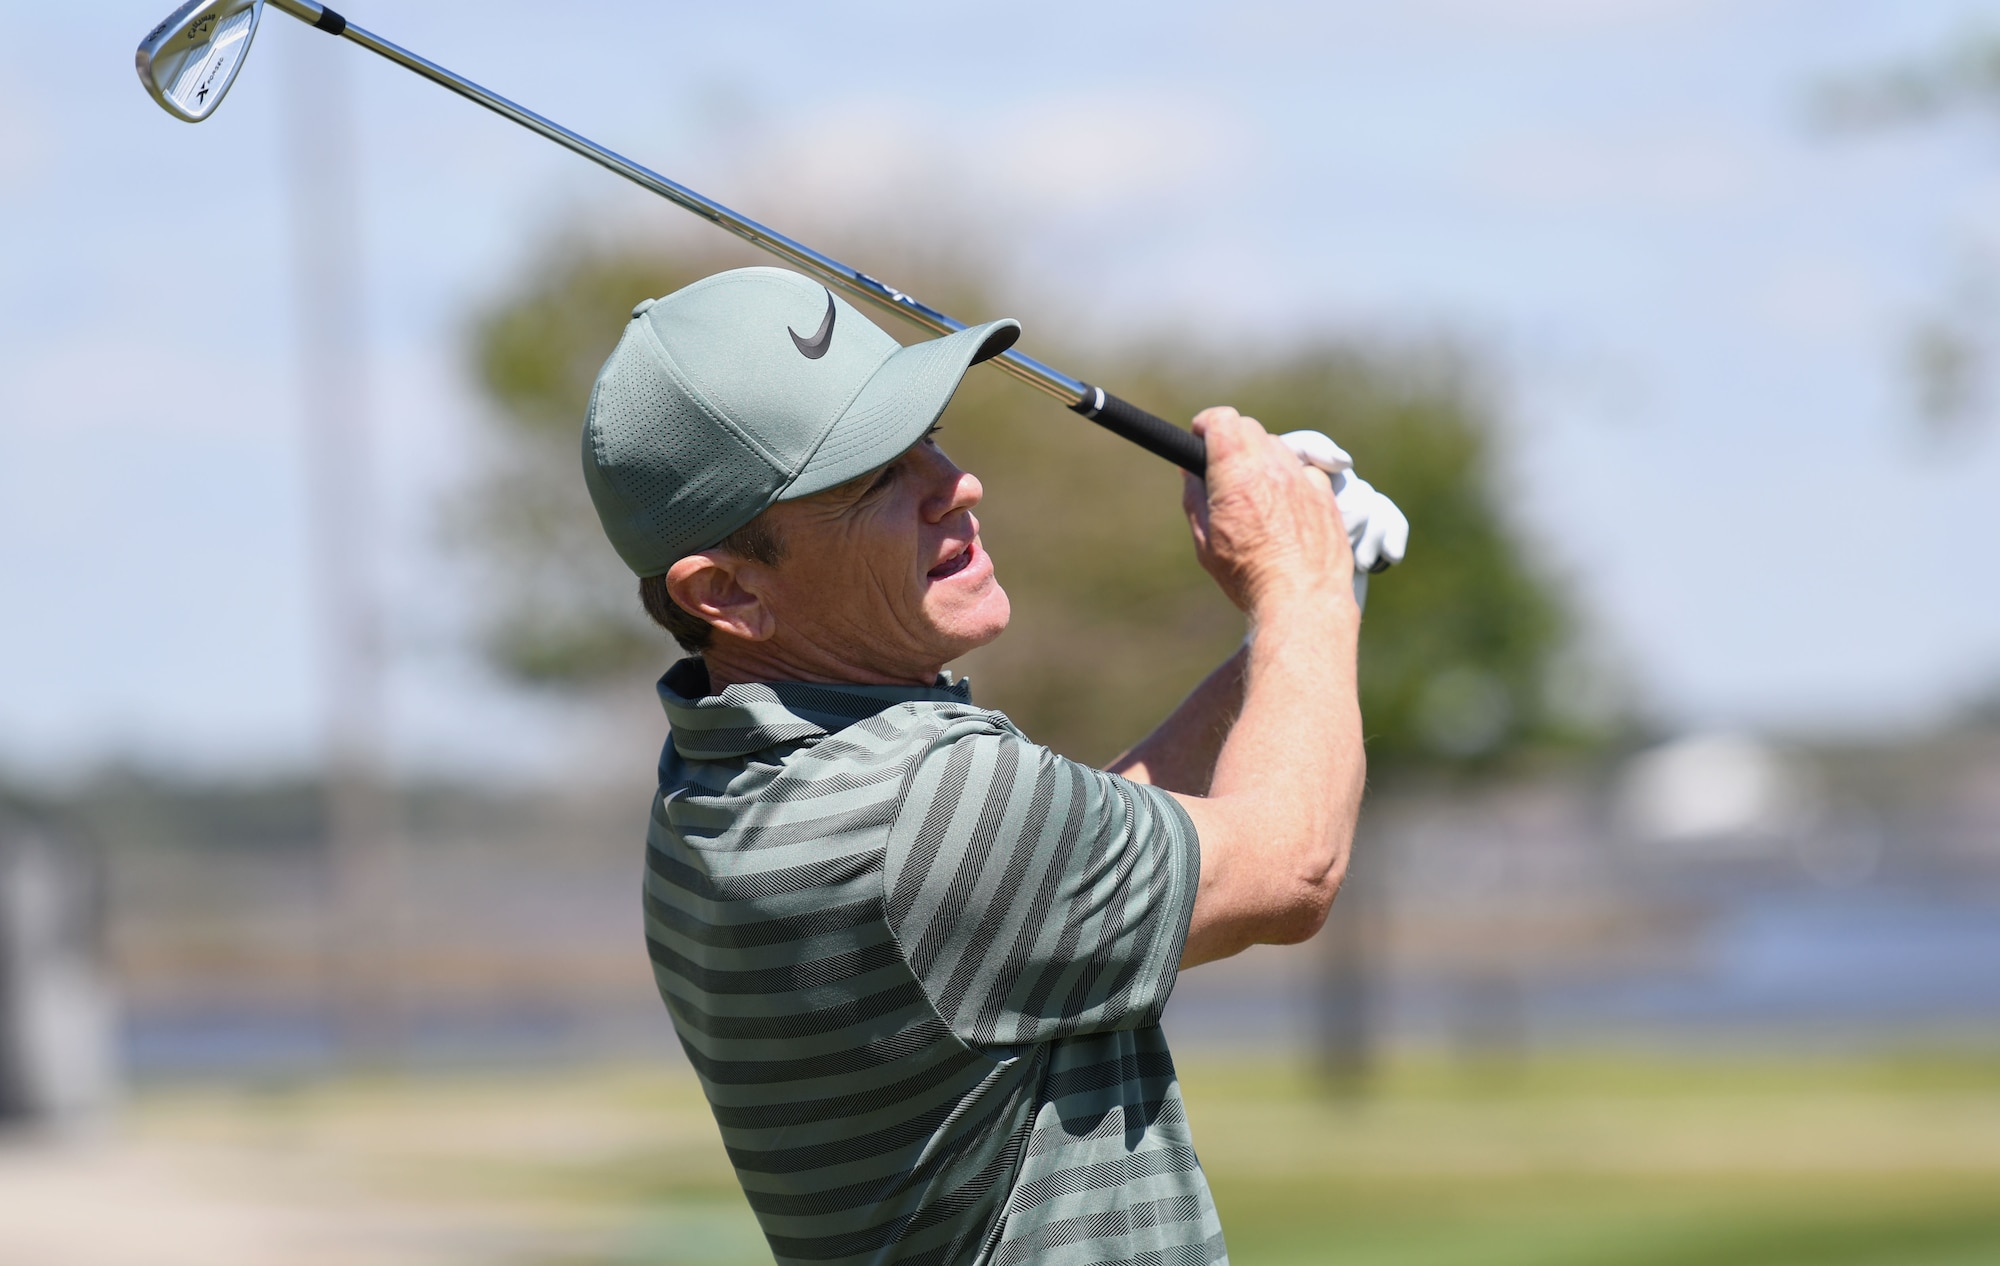 Brian Henninger, Professional Golfers’ Association champion player, demonstrates his golf club swing during a free clinic at the Bay Breeze Golf Course March 20, 2018, on Keesler Air Force Base, Mississippi. Henninger is a two-time PGA and three-time nationwide tour champion and this is the first time he has held a clinic at Keesler. (U.S. Air Force photo by Kemberly Groue)